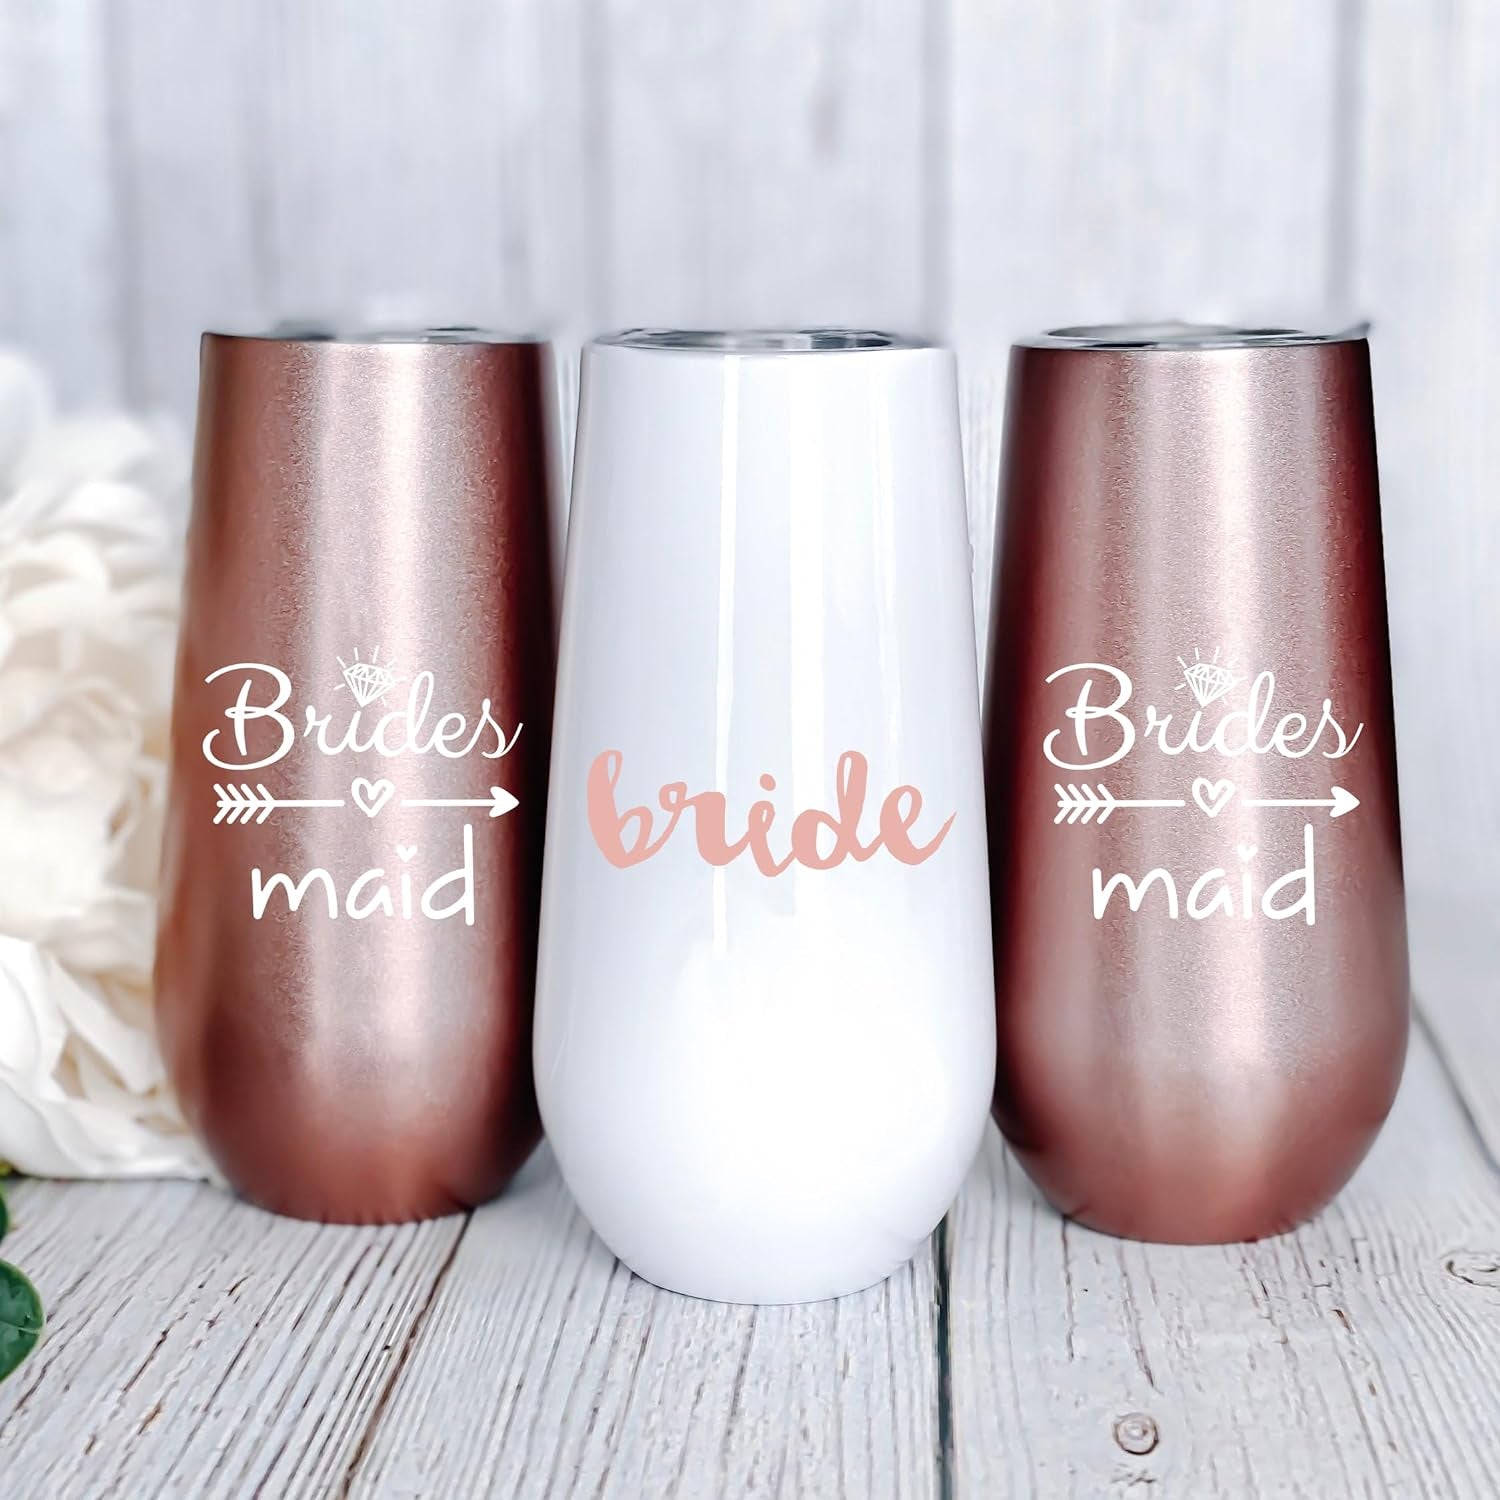 Bride to Be Champagne Flute | 6 Oz Bridesmaid Stainless Steel Wine Tumblers | Bridal Shower Gift, Bridesmaid Proposal Box, Bride Tribe Bachelorette Party Supplies | Bridal Party Cups & Bridesmaid Cups